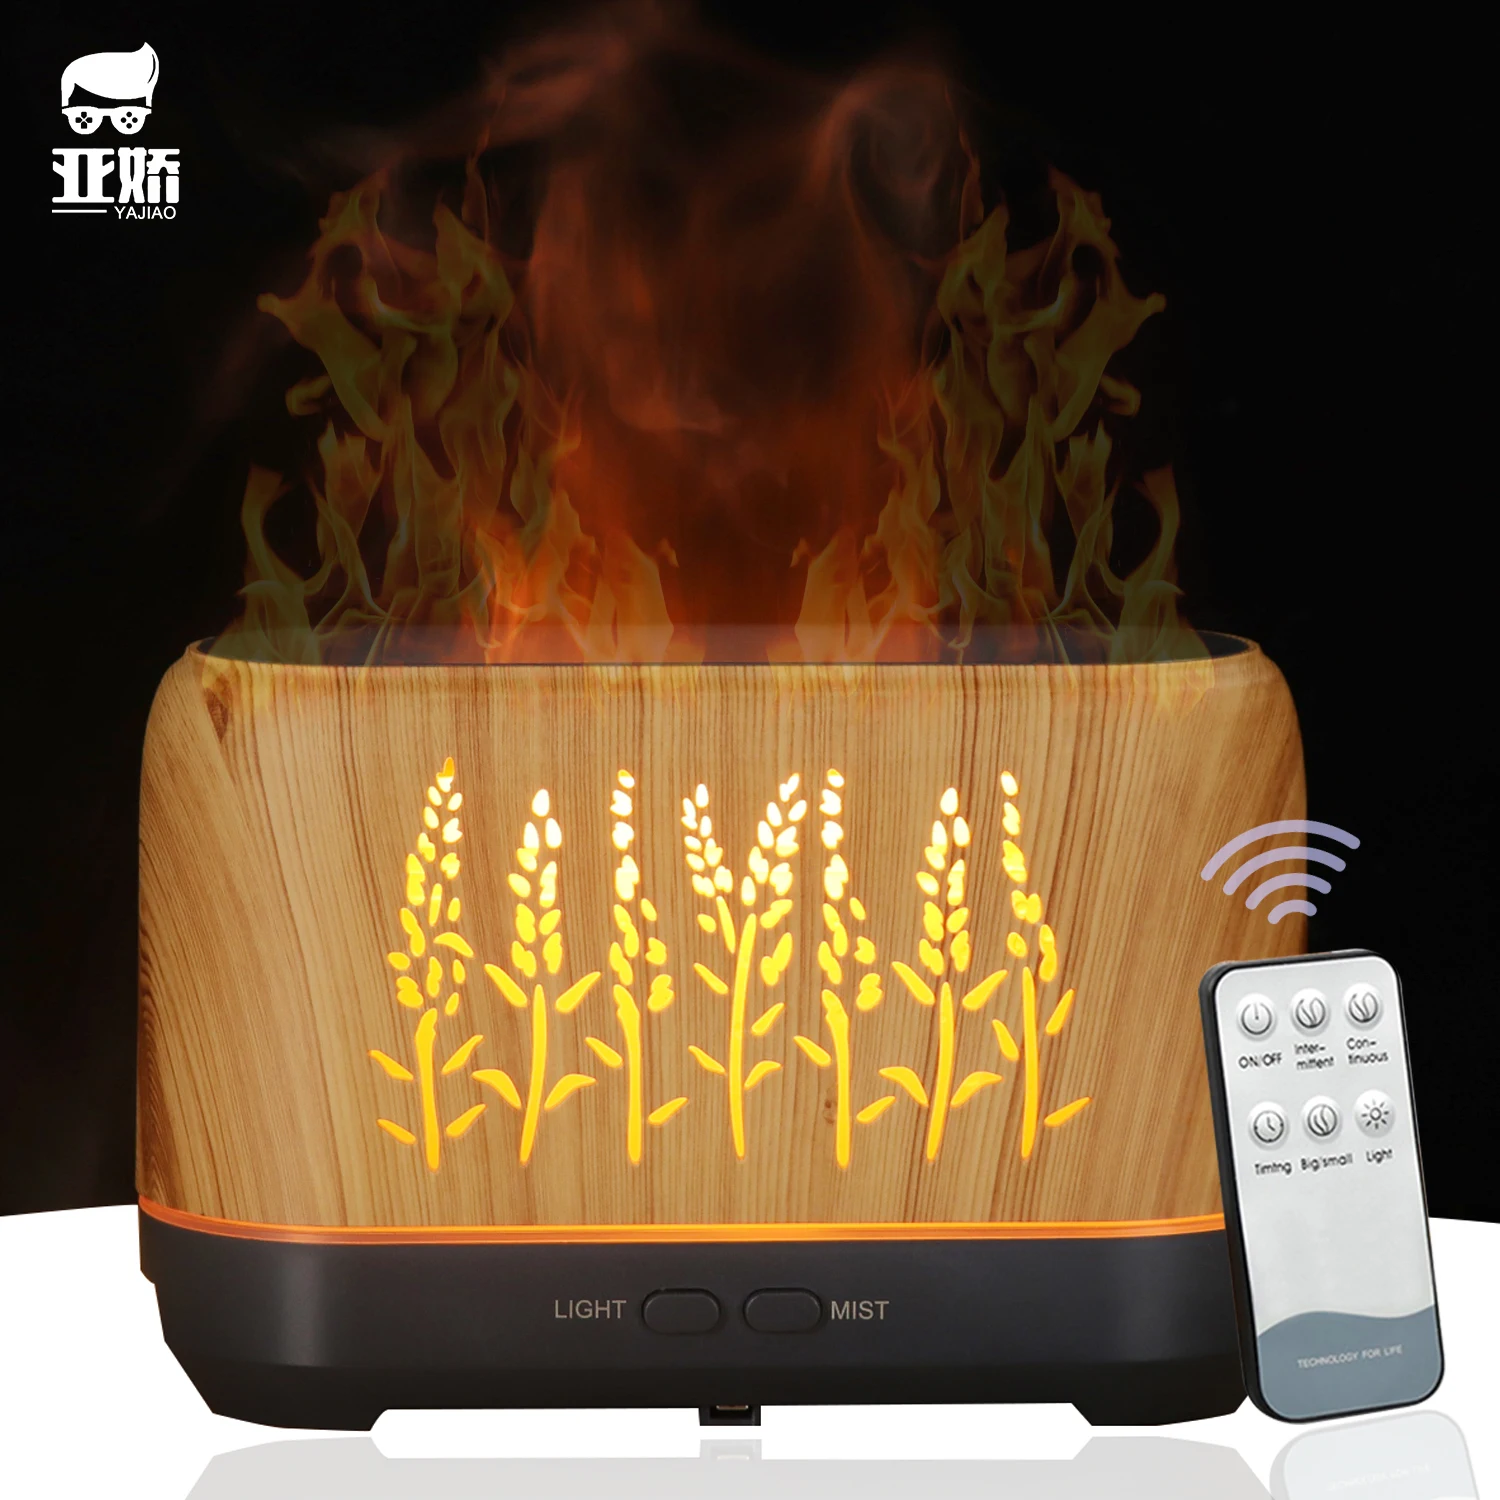 

YAJIAO Timeable Air Humidifier Flame Wood Grain Aroma Essential Oil Diffuser With Remote Control USB Soft Light Humidifier